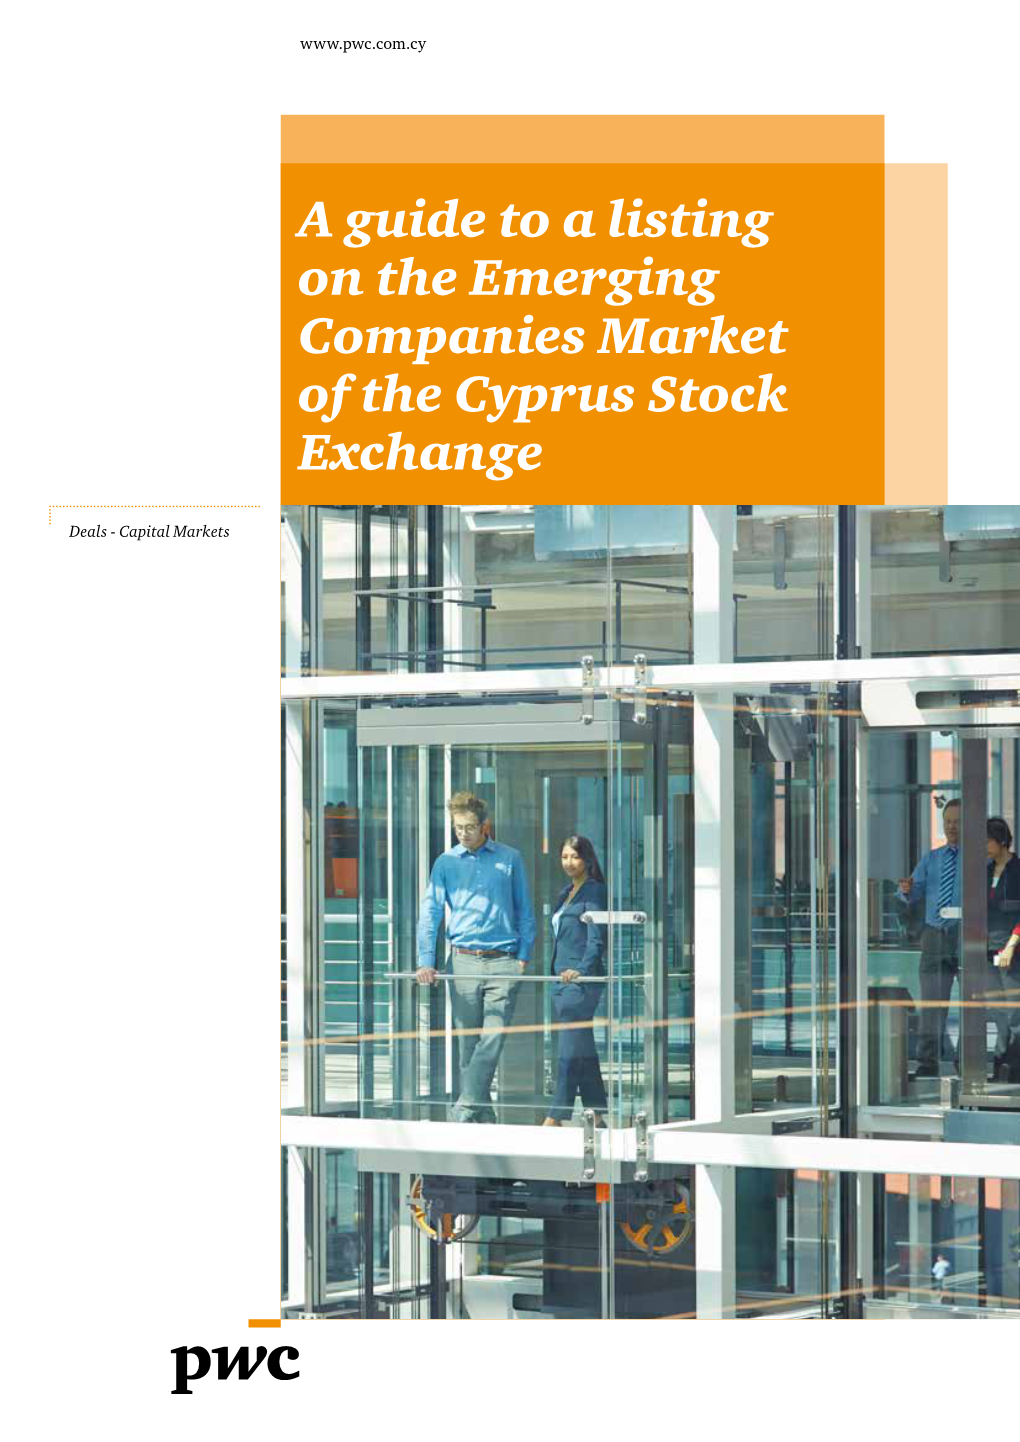 A Guide to a Listing on the Emerging Companies Market of the Cyprus Stock Exchange